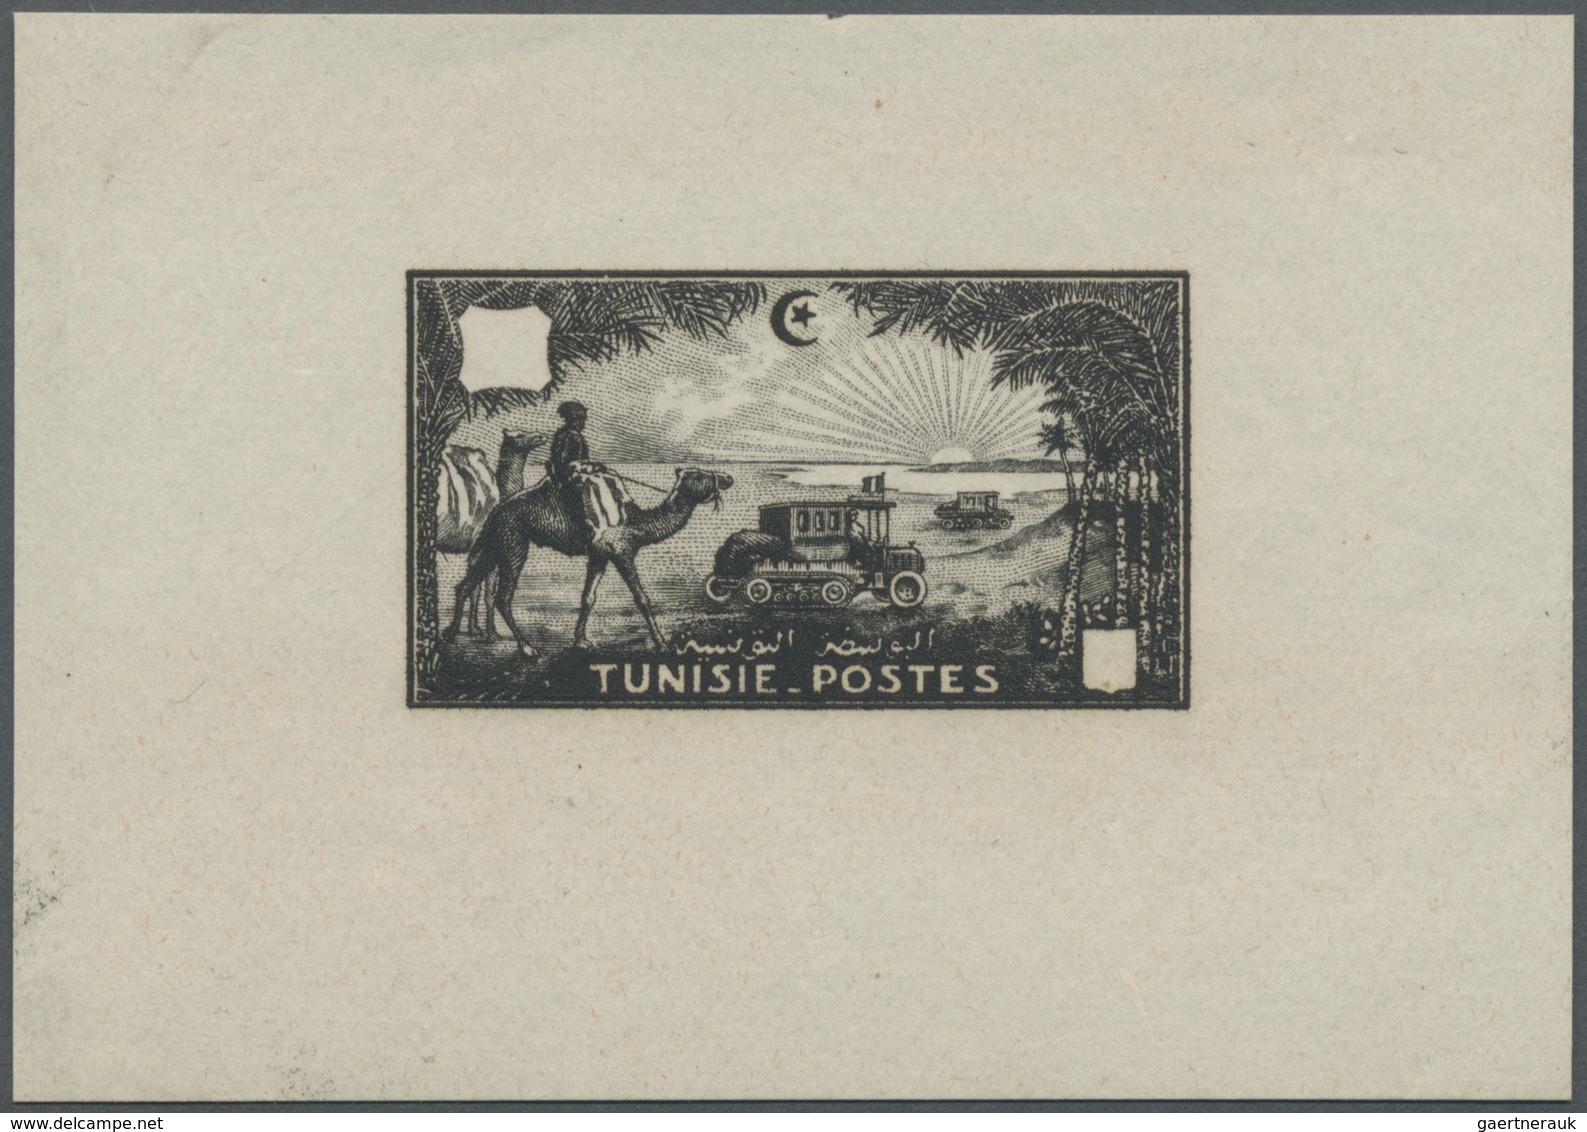 (*) Tunesien: 1928, Children's Relief, Imperforate Proof In Brownish Black, Issued Design With Blank Val - Tunisie (1956-...)